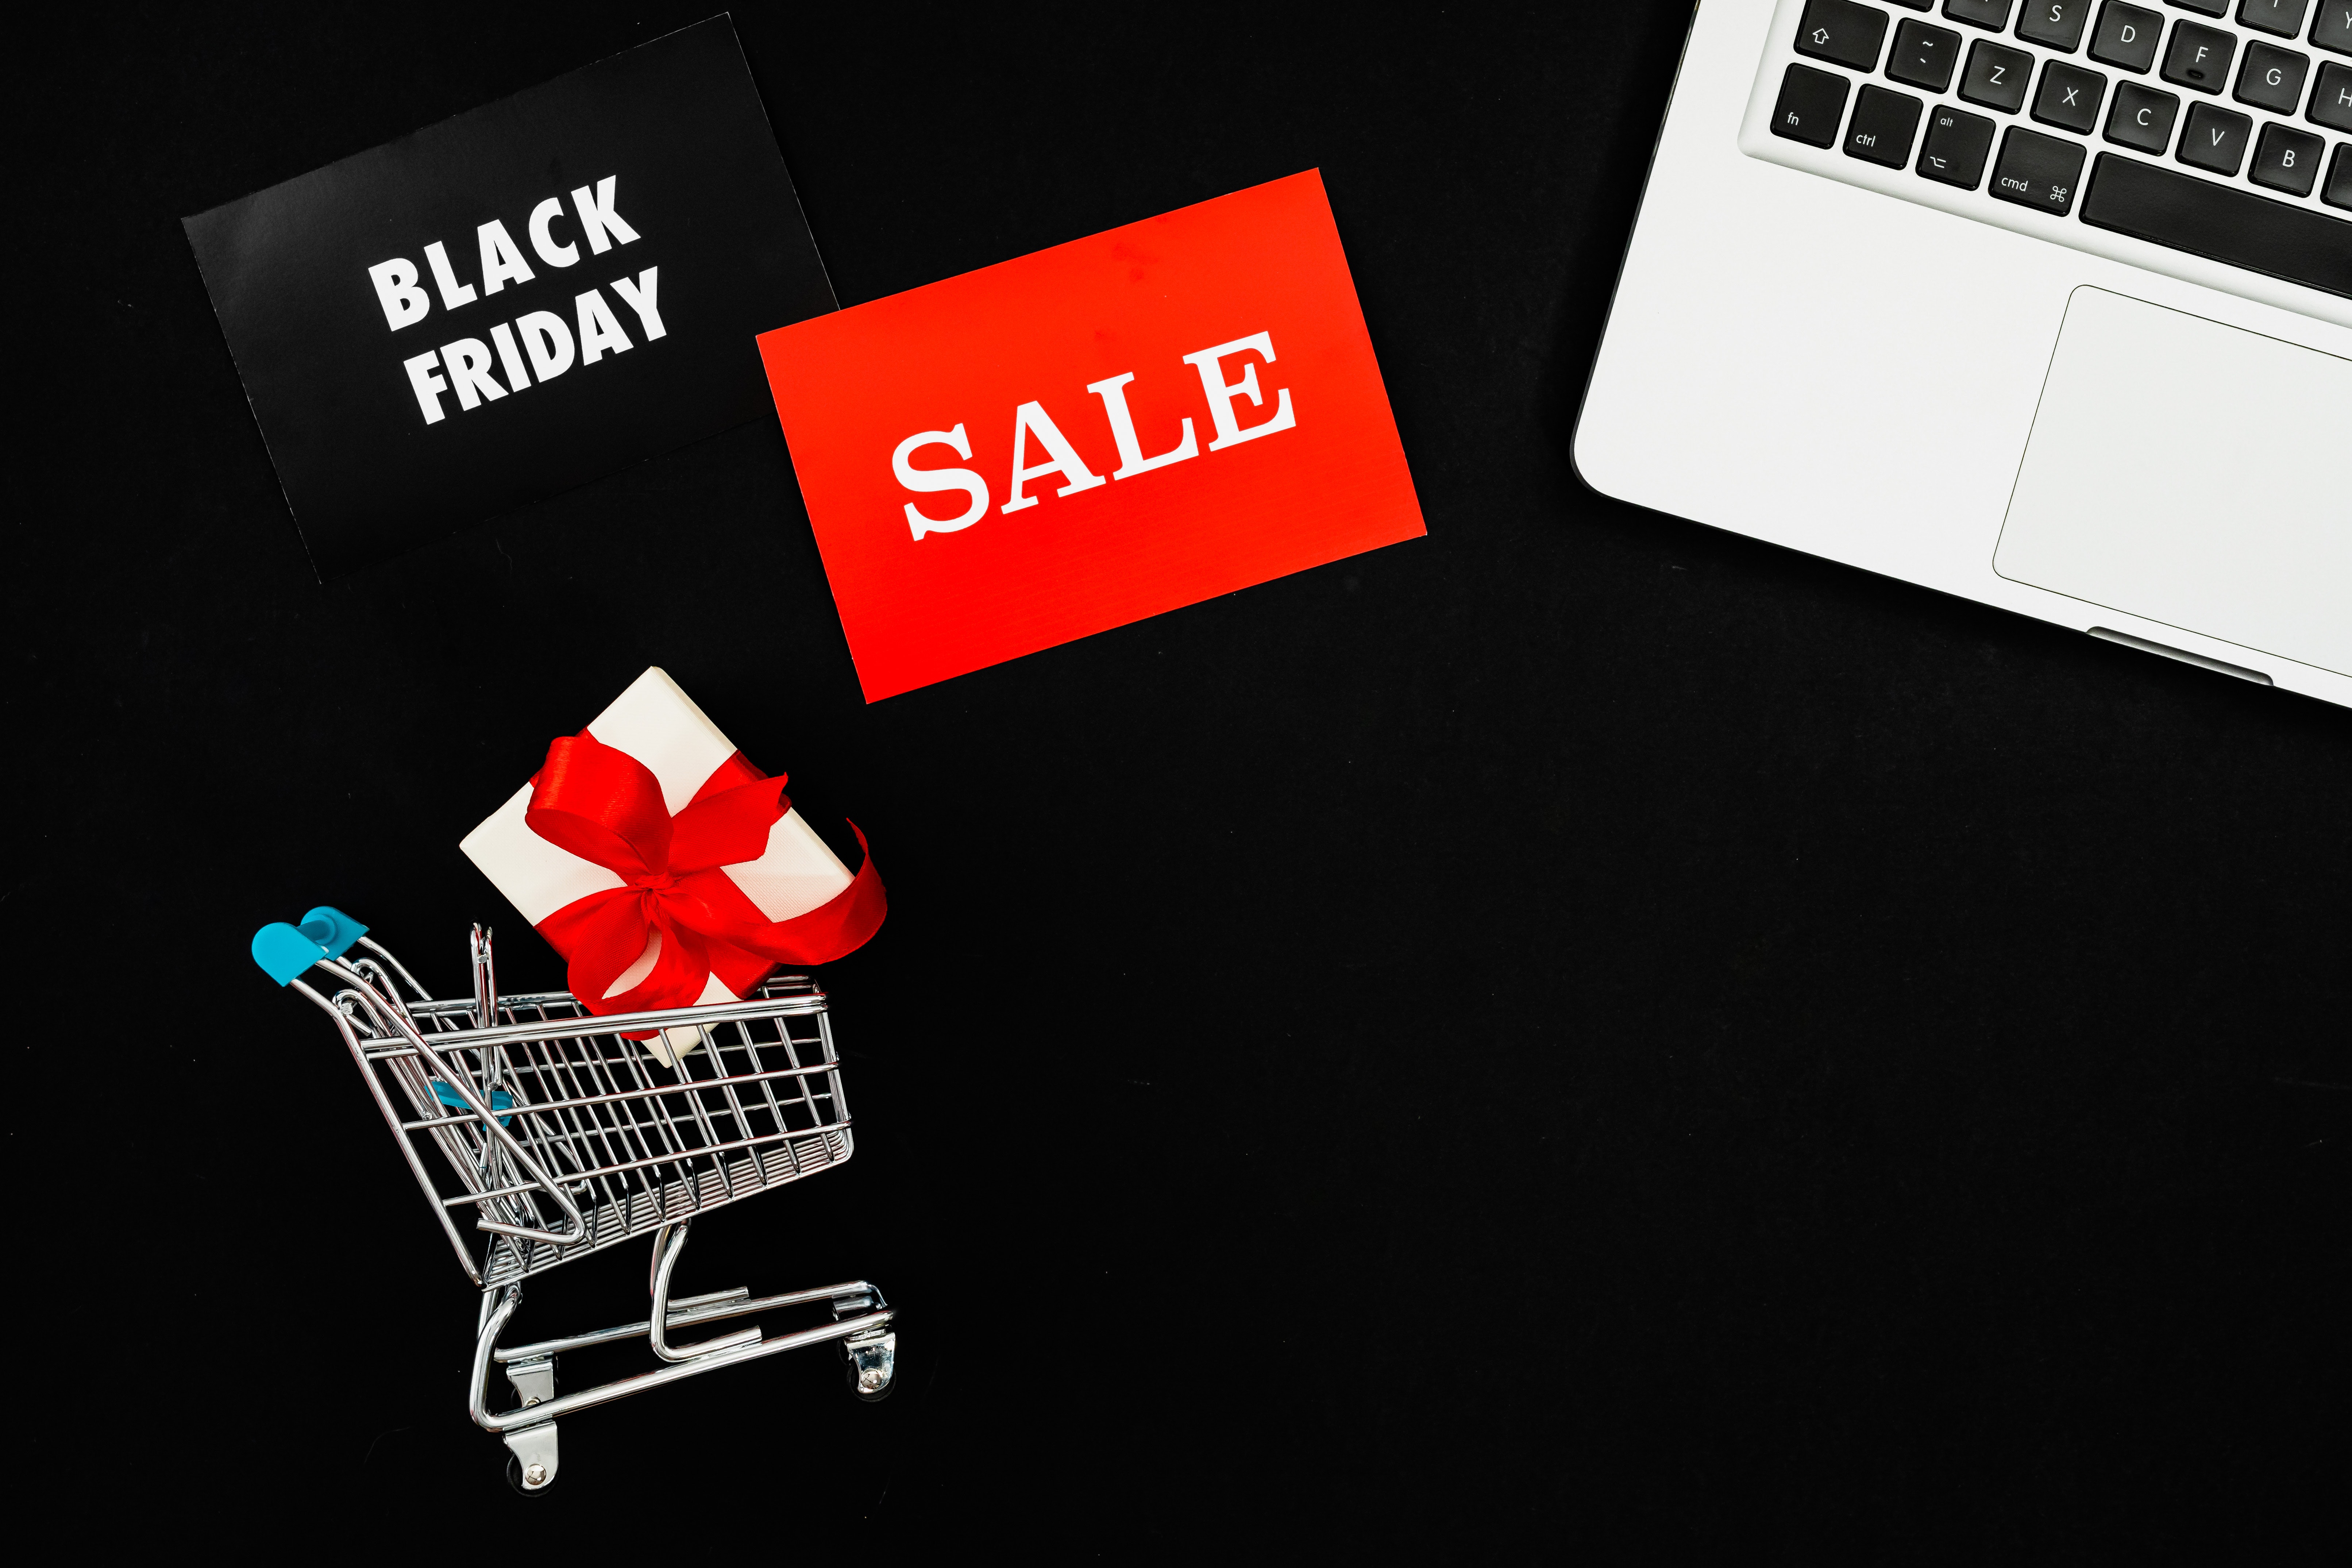 Image showing a black Friday campaign themed banner